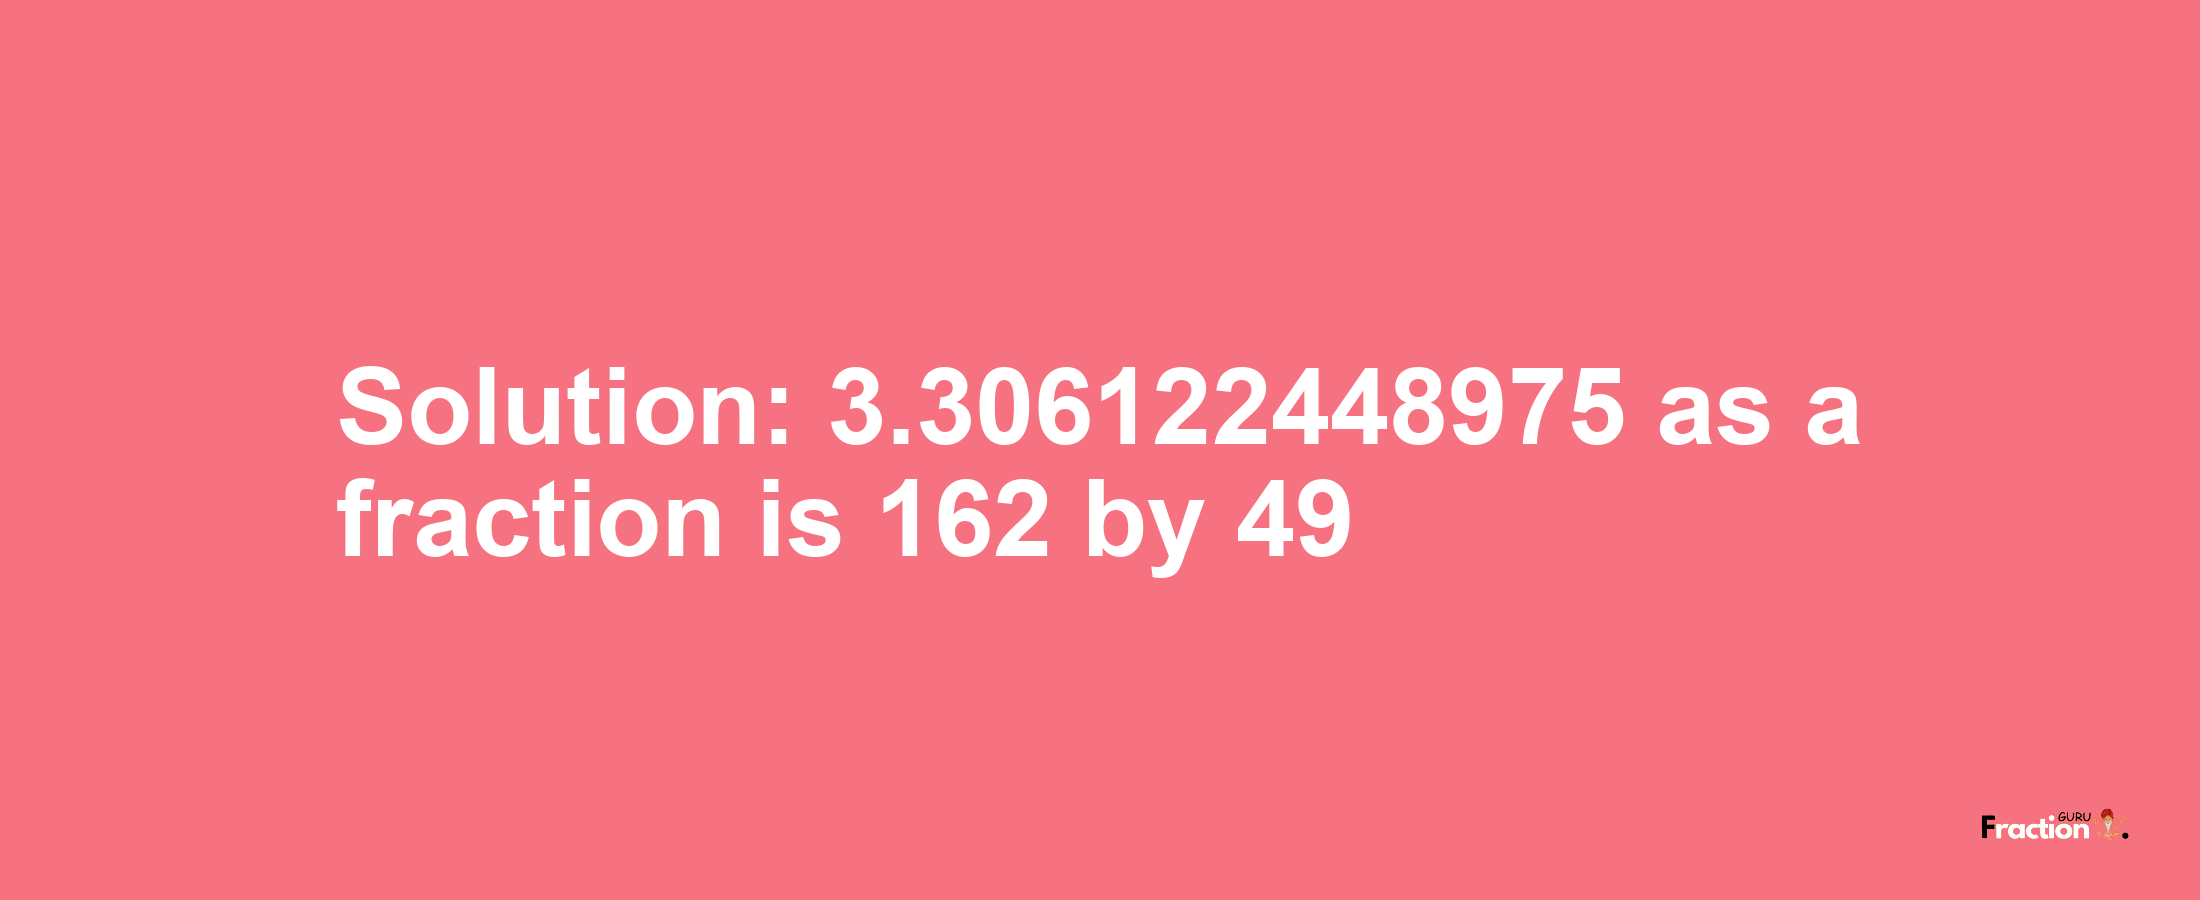 Solution:3.306122448975 as a fraction is 162/49